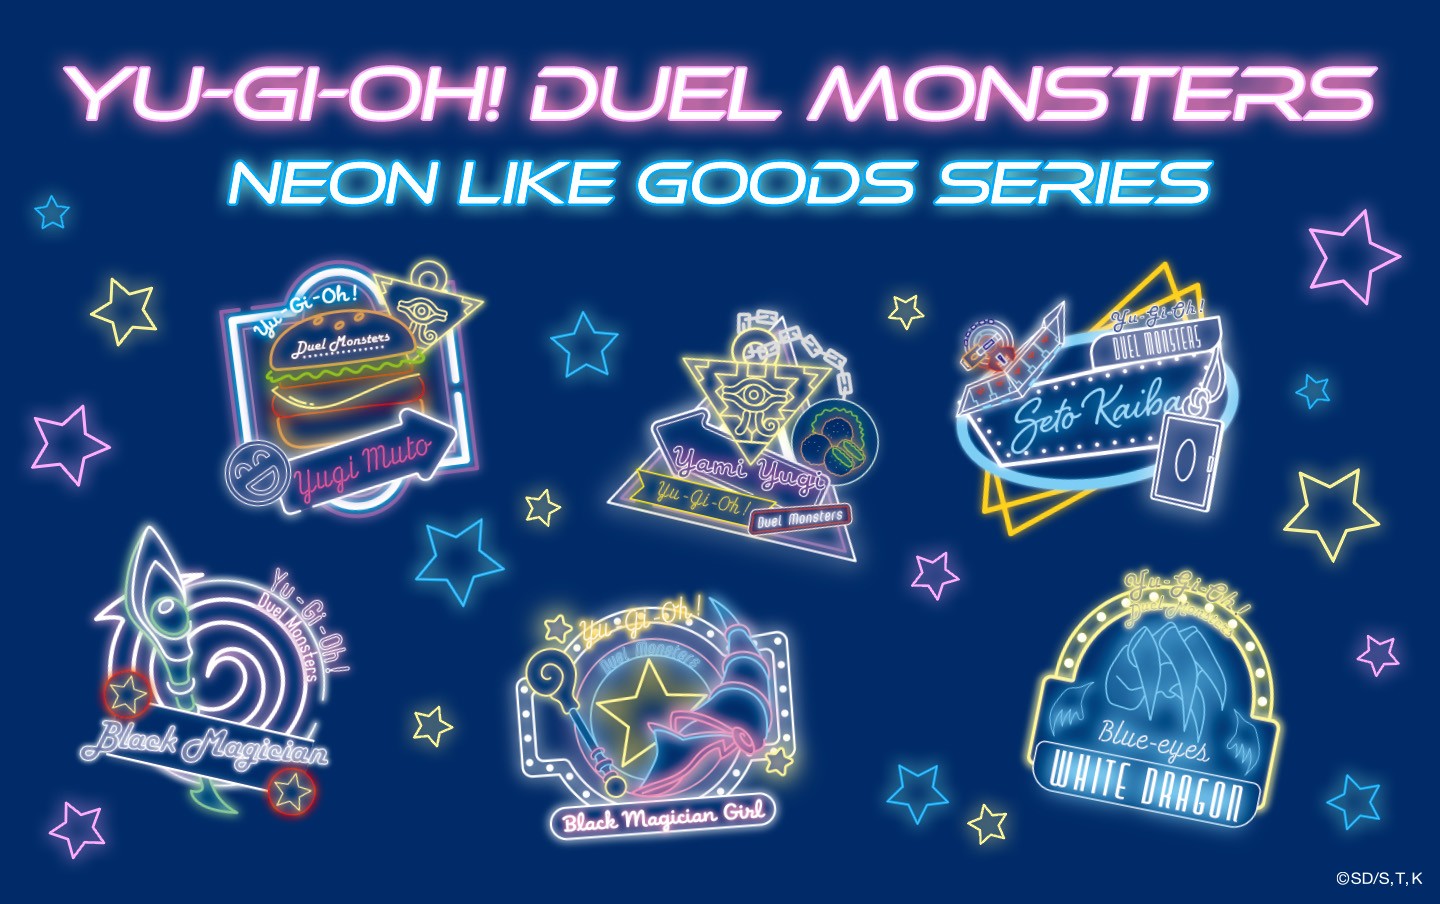 Yu-Gi-Oh! Duel Monsters NEW GOODS SERIES